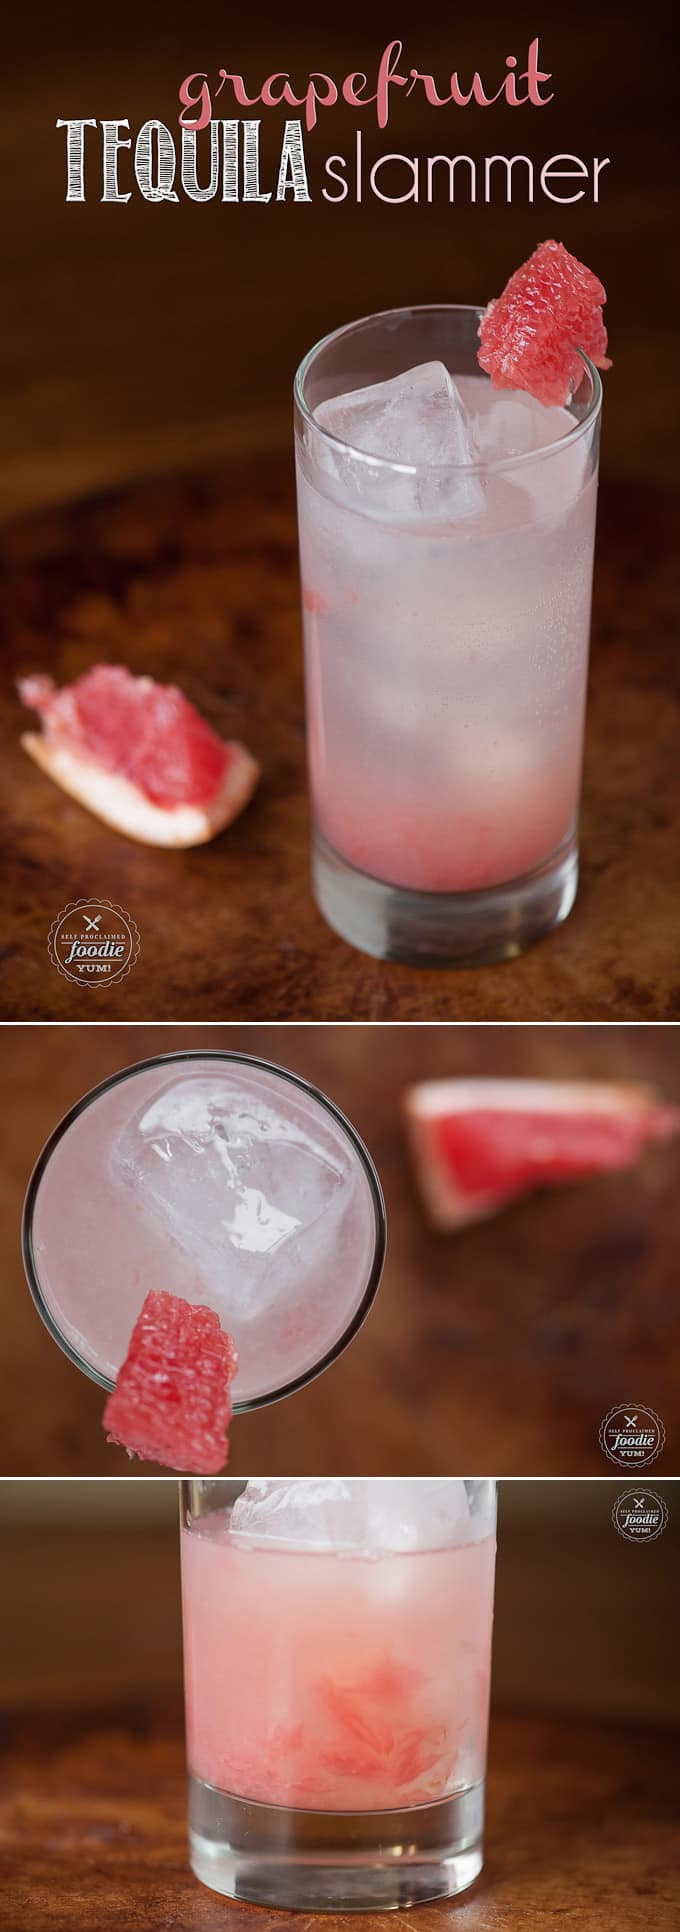 Easy Mixed Drinks With Tequila
 Grapefruit Tequila Slammer